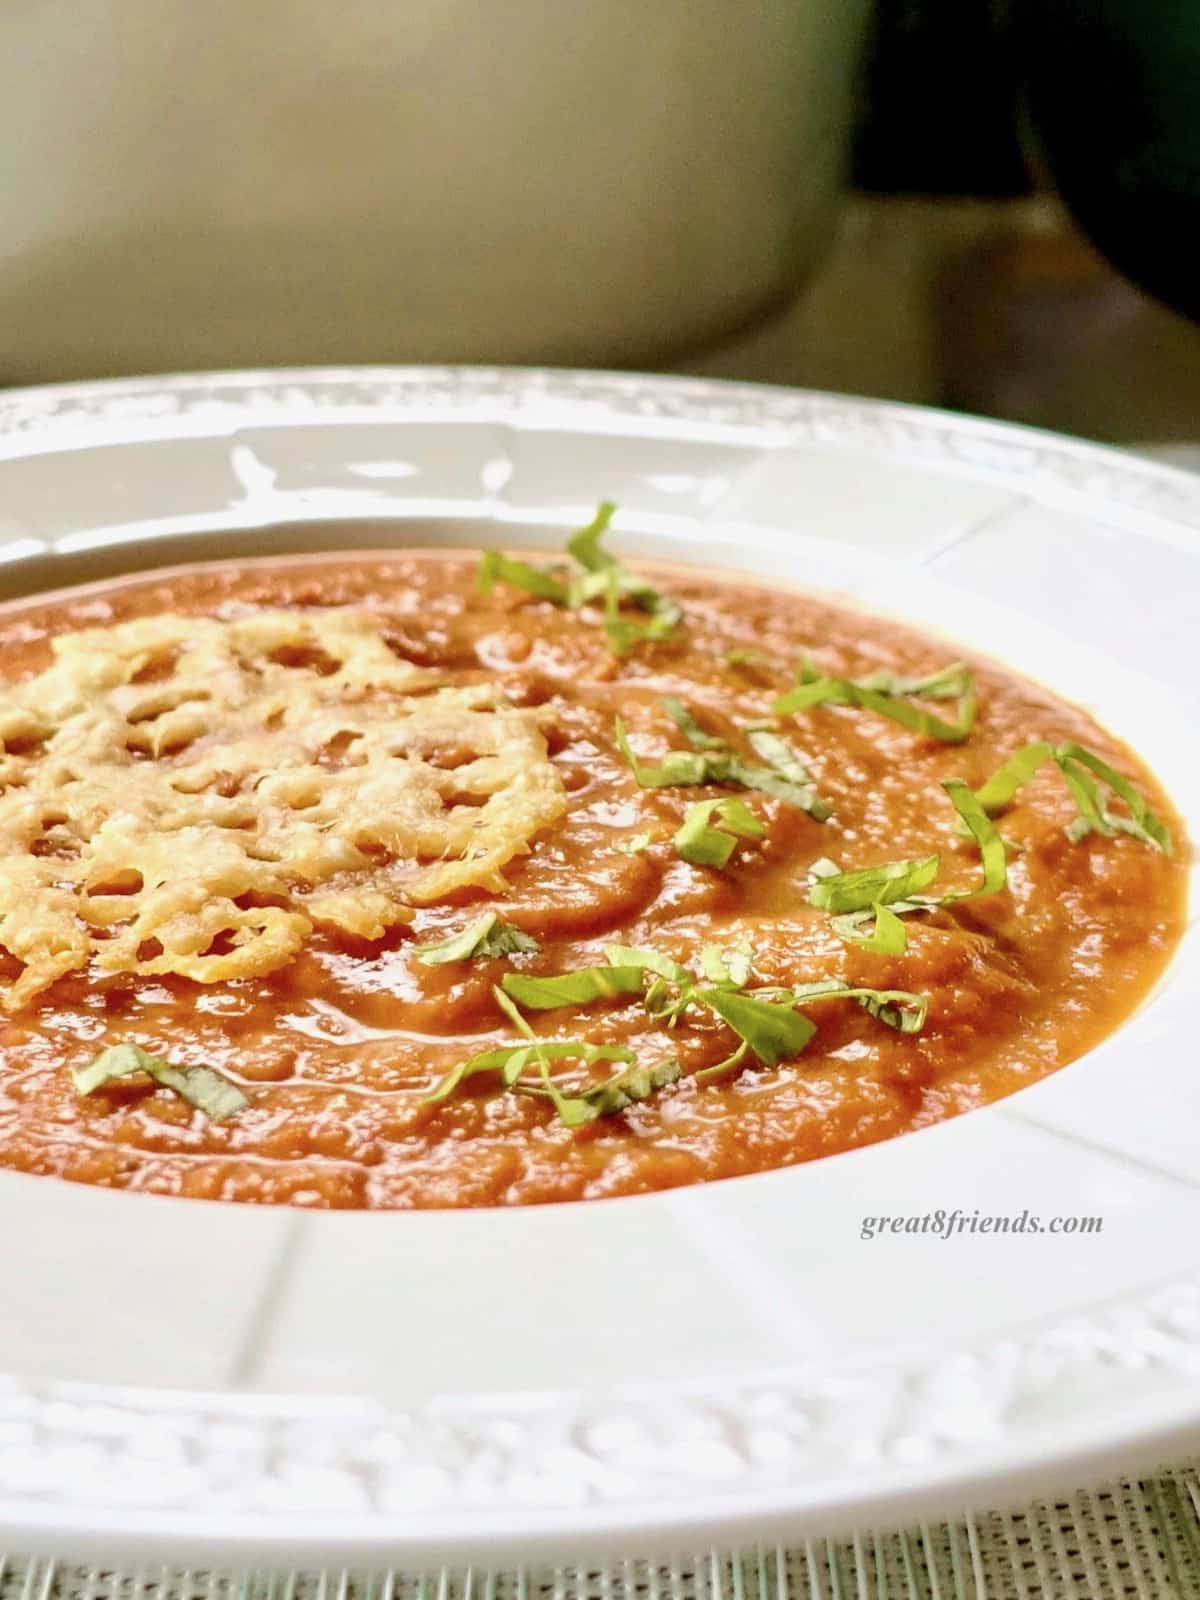 Tomato soup topped with shredded basil and parmesan crisps.